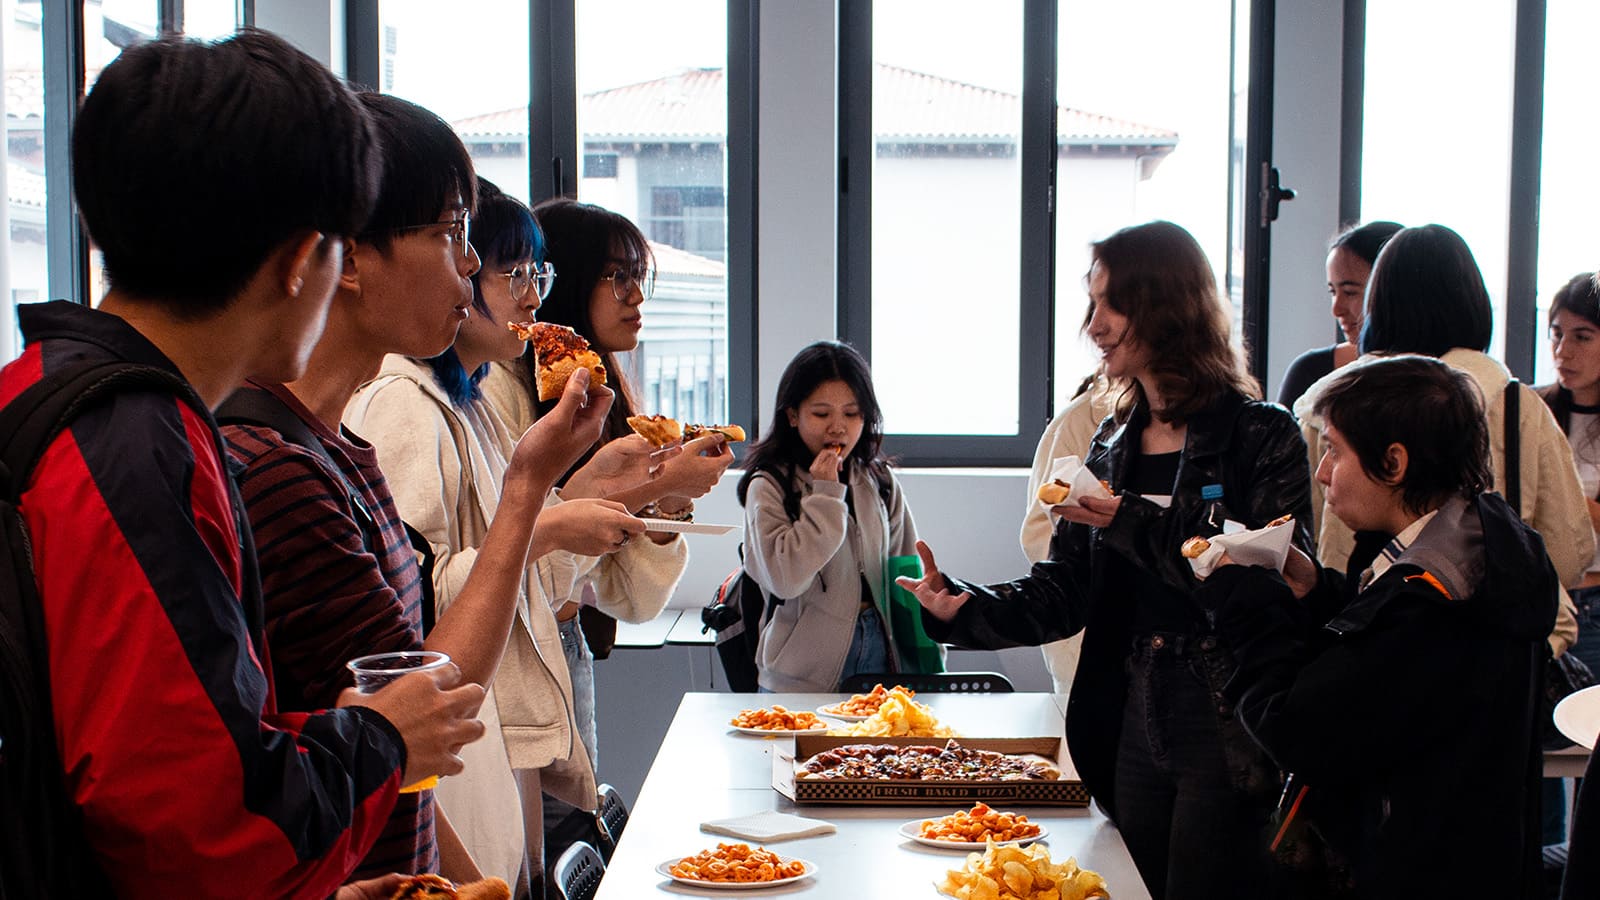 Host students and guest students are sharing food and drinks at the meet and greet event from OIP at DigiPen Europe-Bilbao campus.